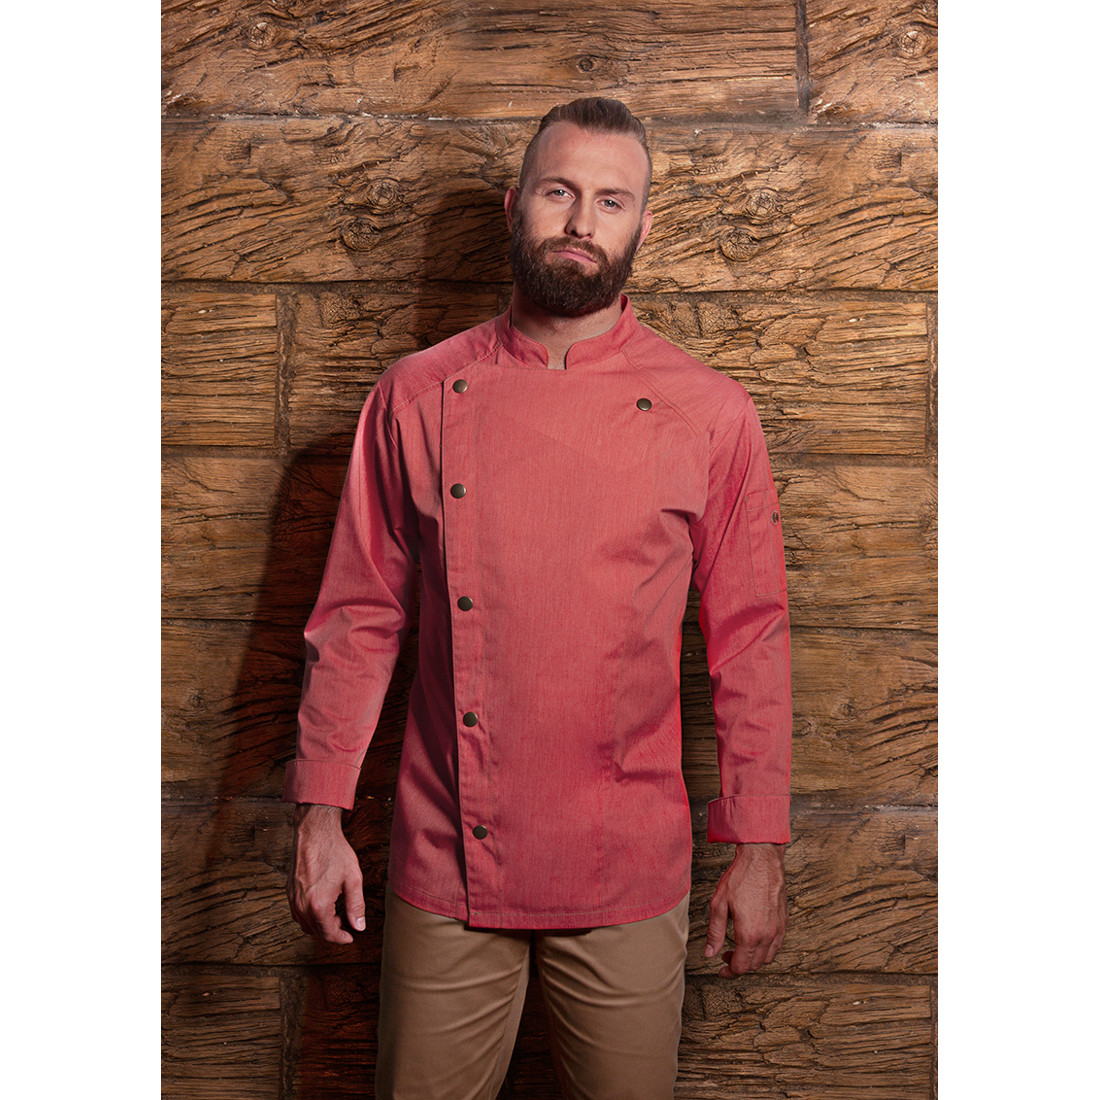 Chef Jacket Jeans-Style - Safetywear